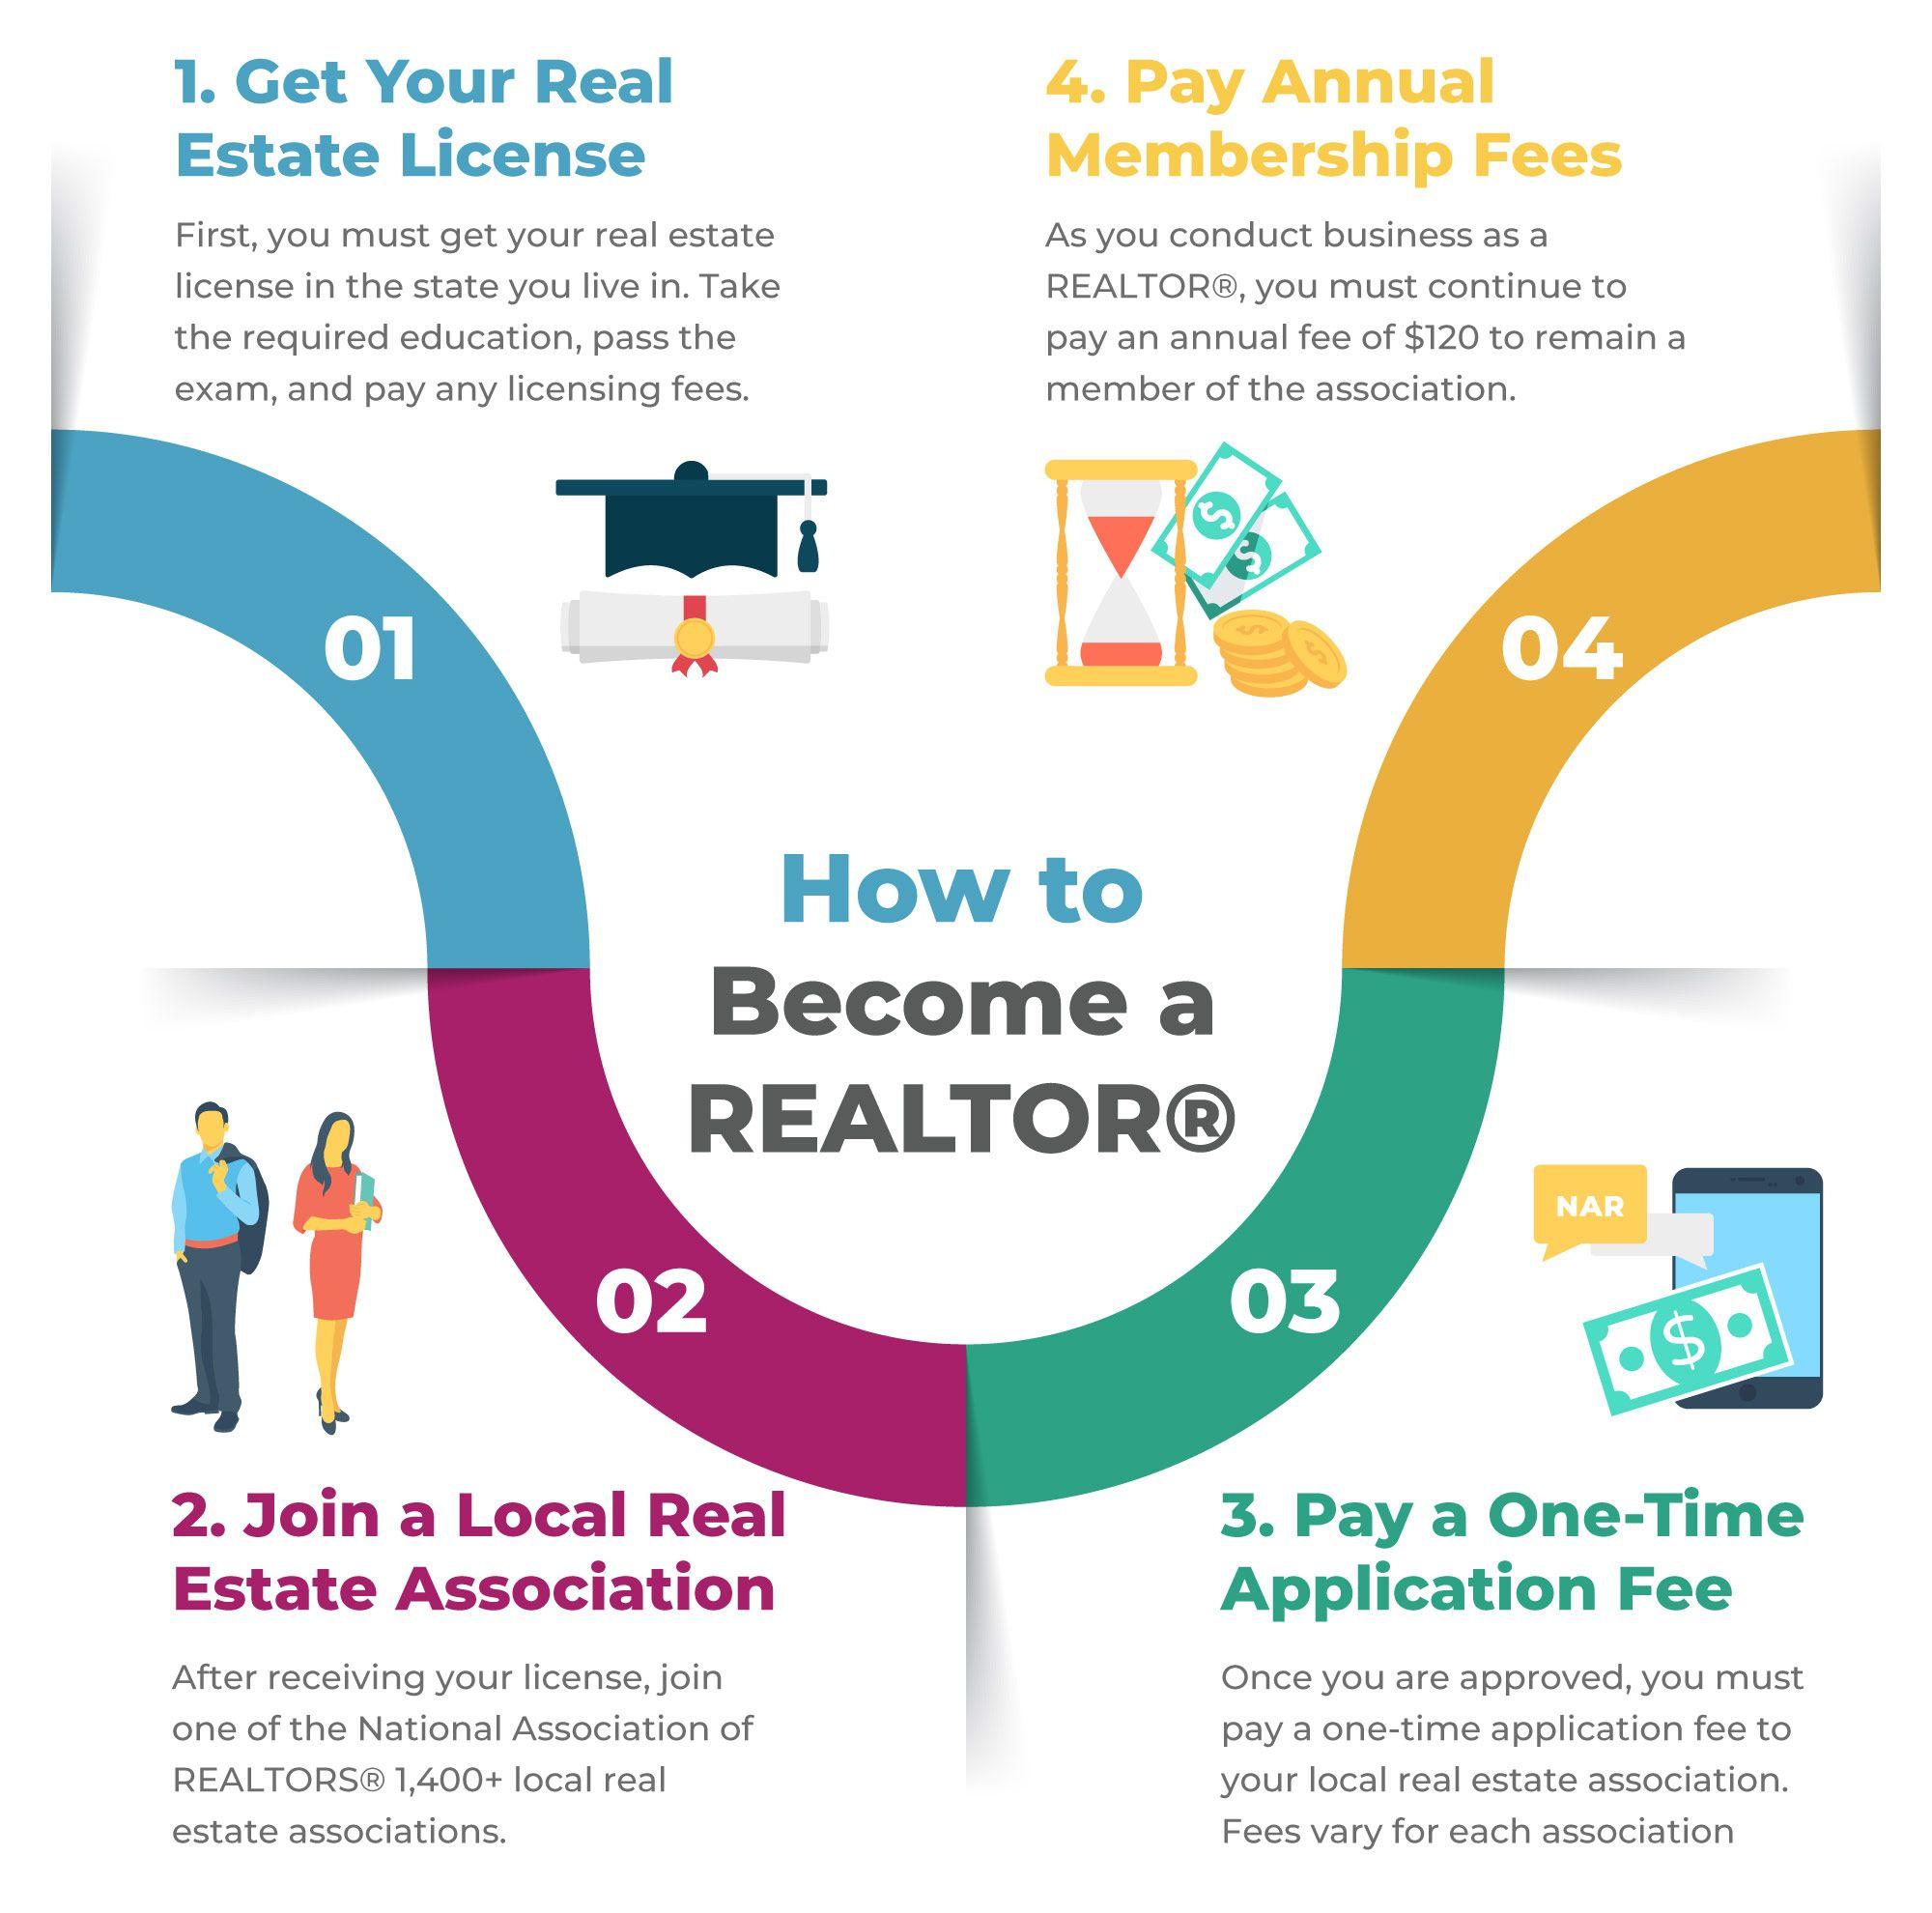 What is required to become a real estate agent